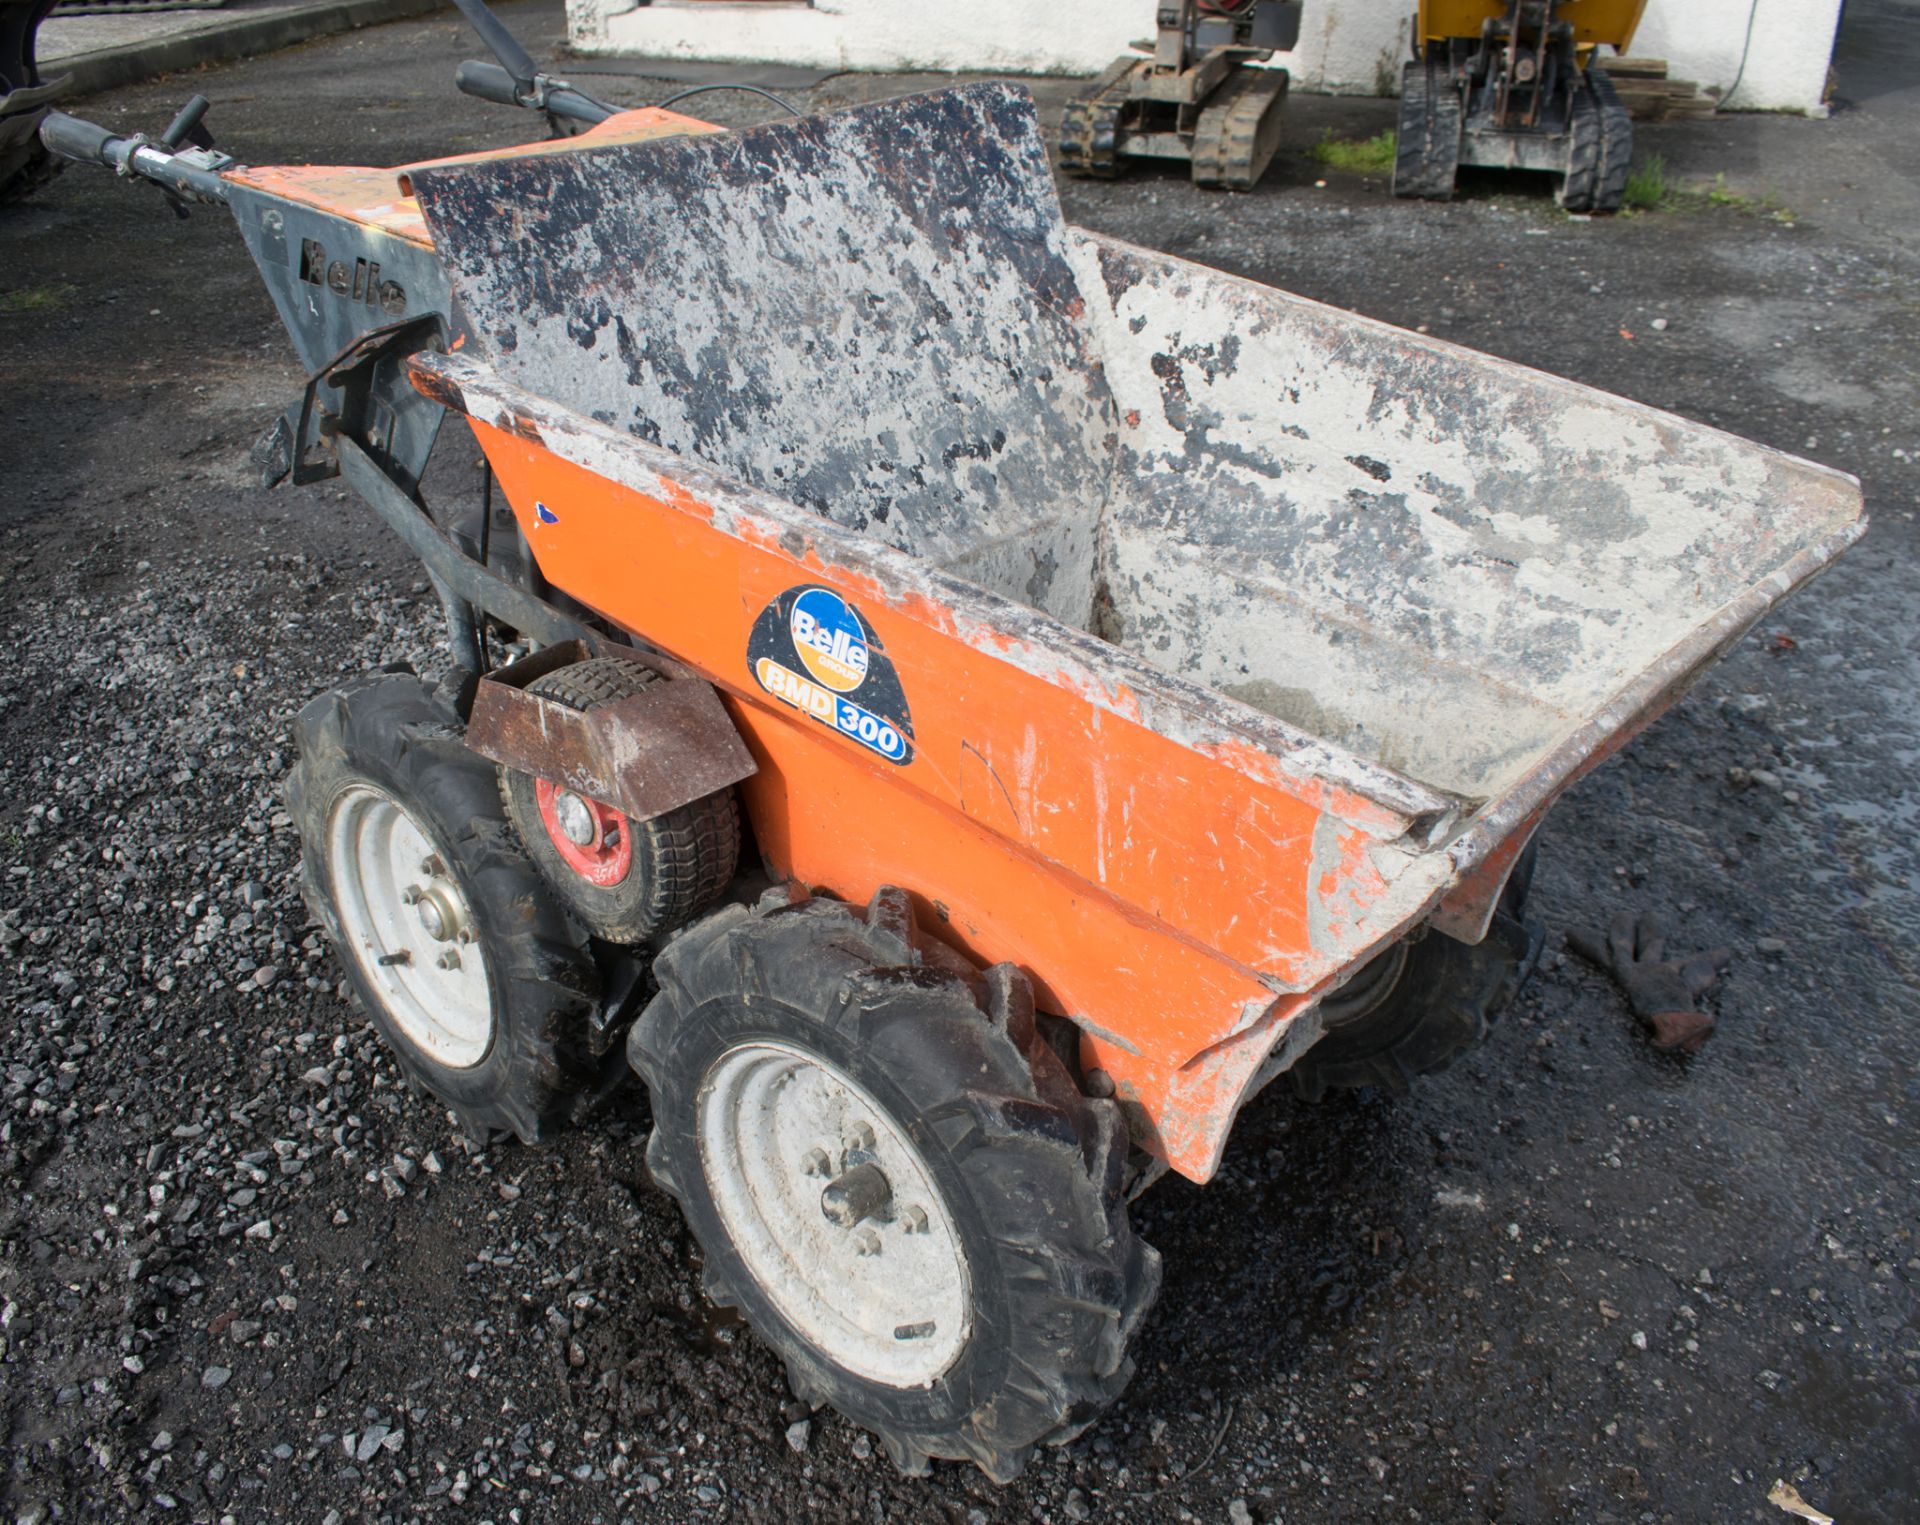 BELLE BMD 300 petrol driven walk behind powered barrow Year: 2007 S/N: 41603 - Image 2 of 3